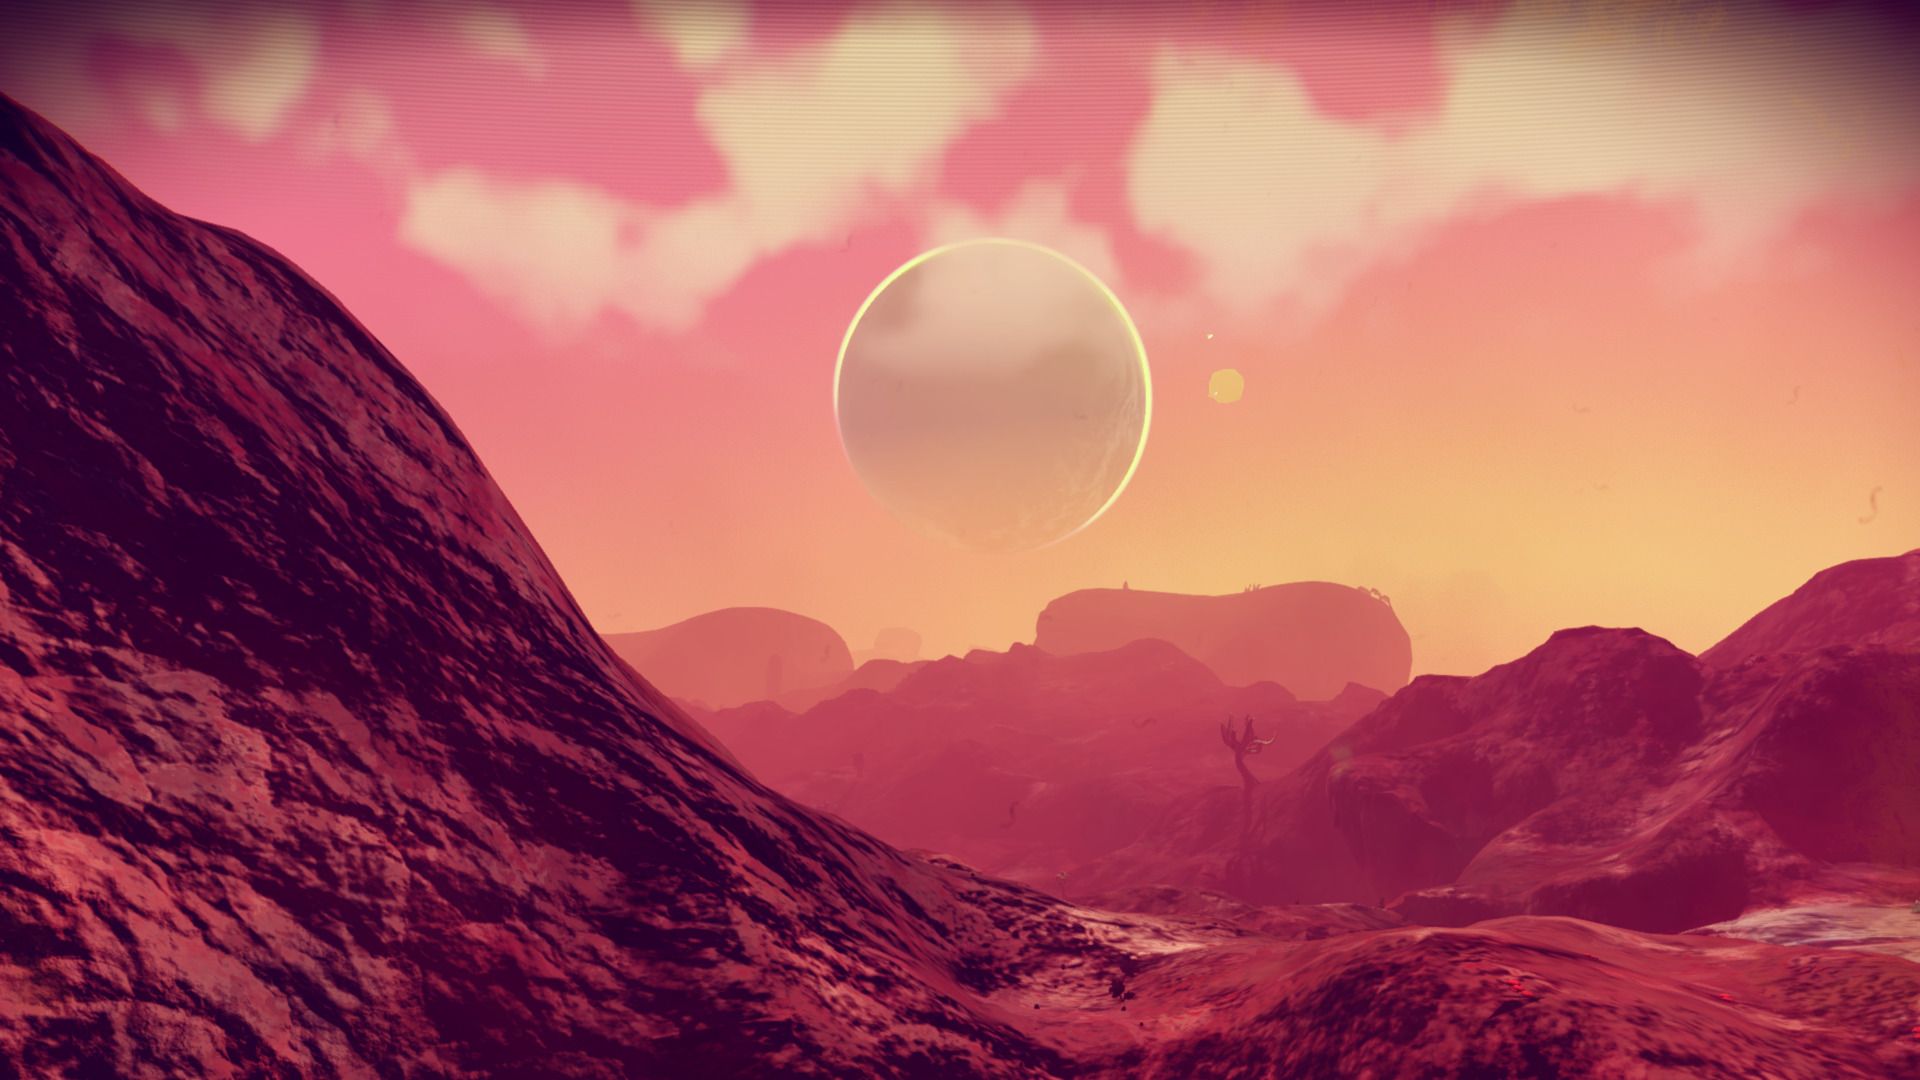 No Mans Sky, Video games, Low quality terrain Wallpaper HD / Desktop and Mobile Background